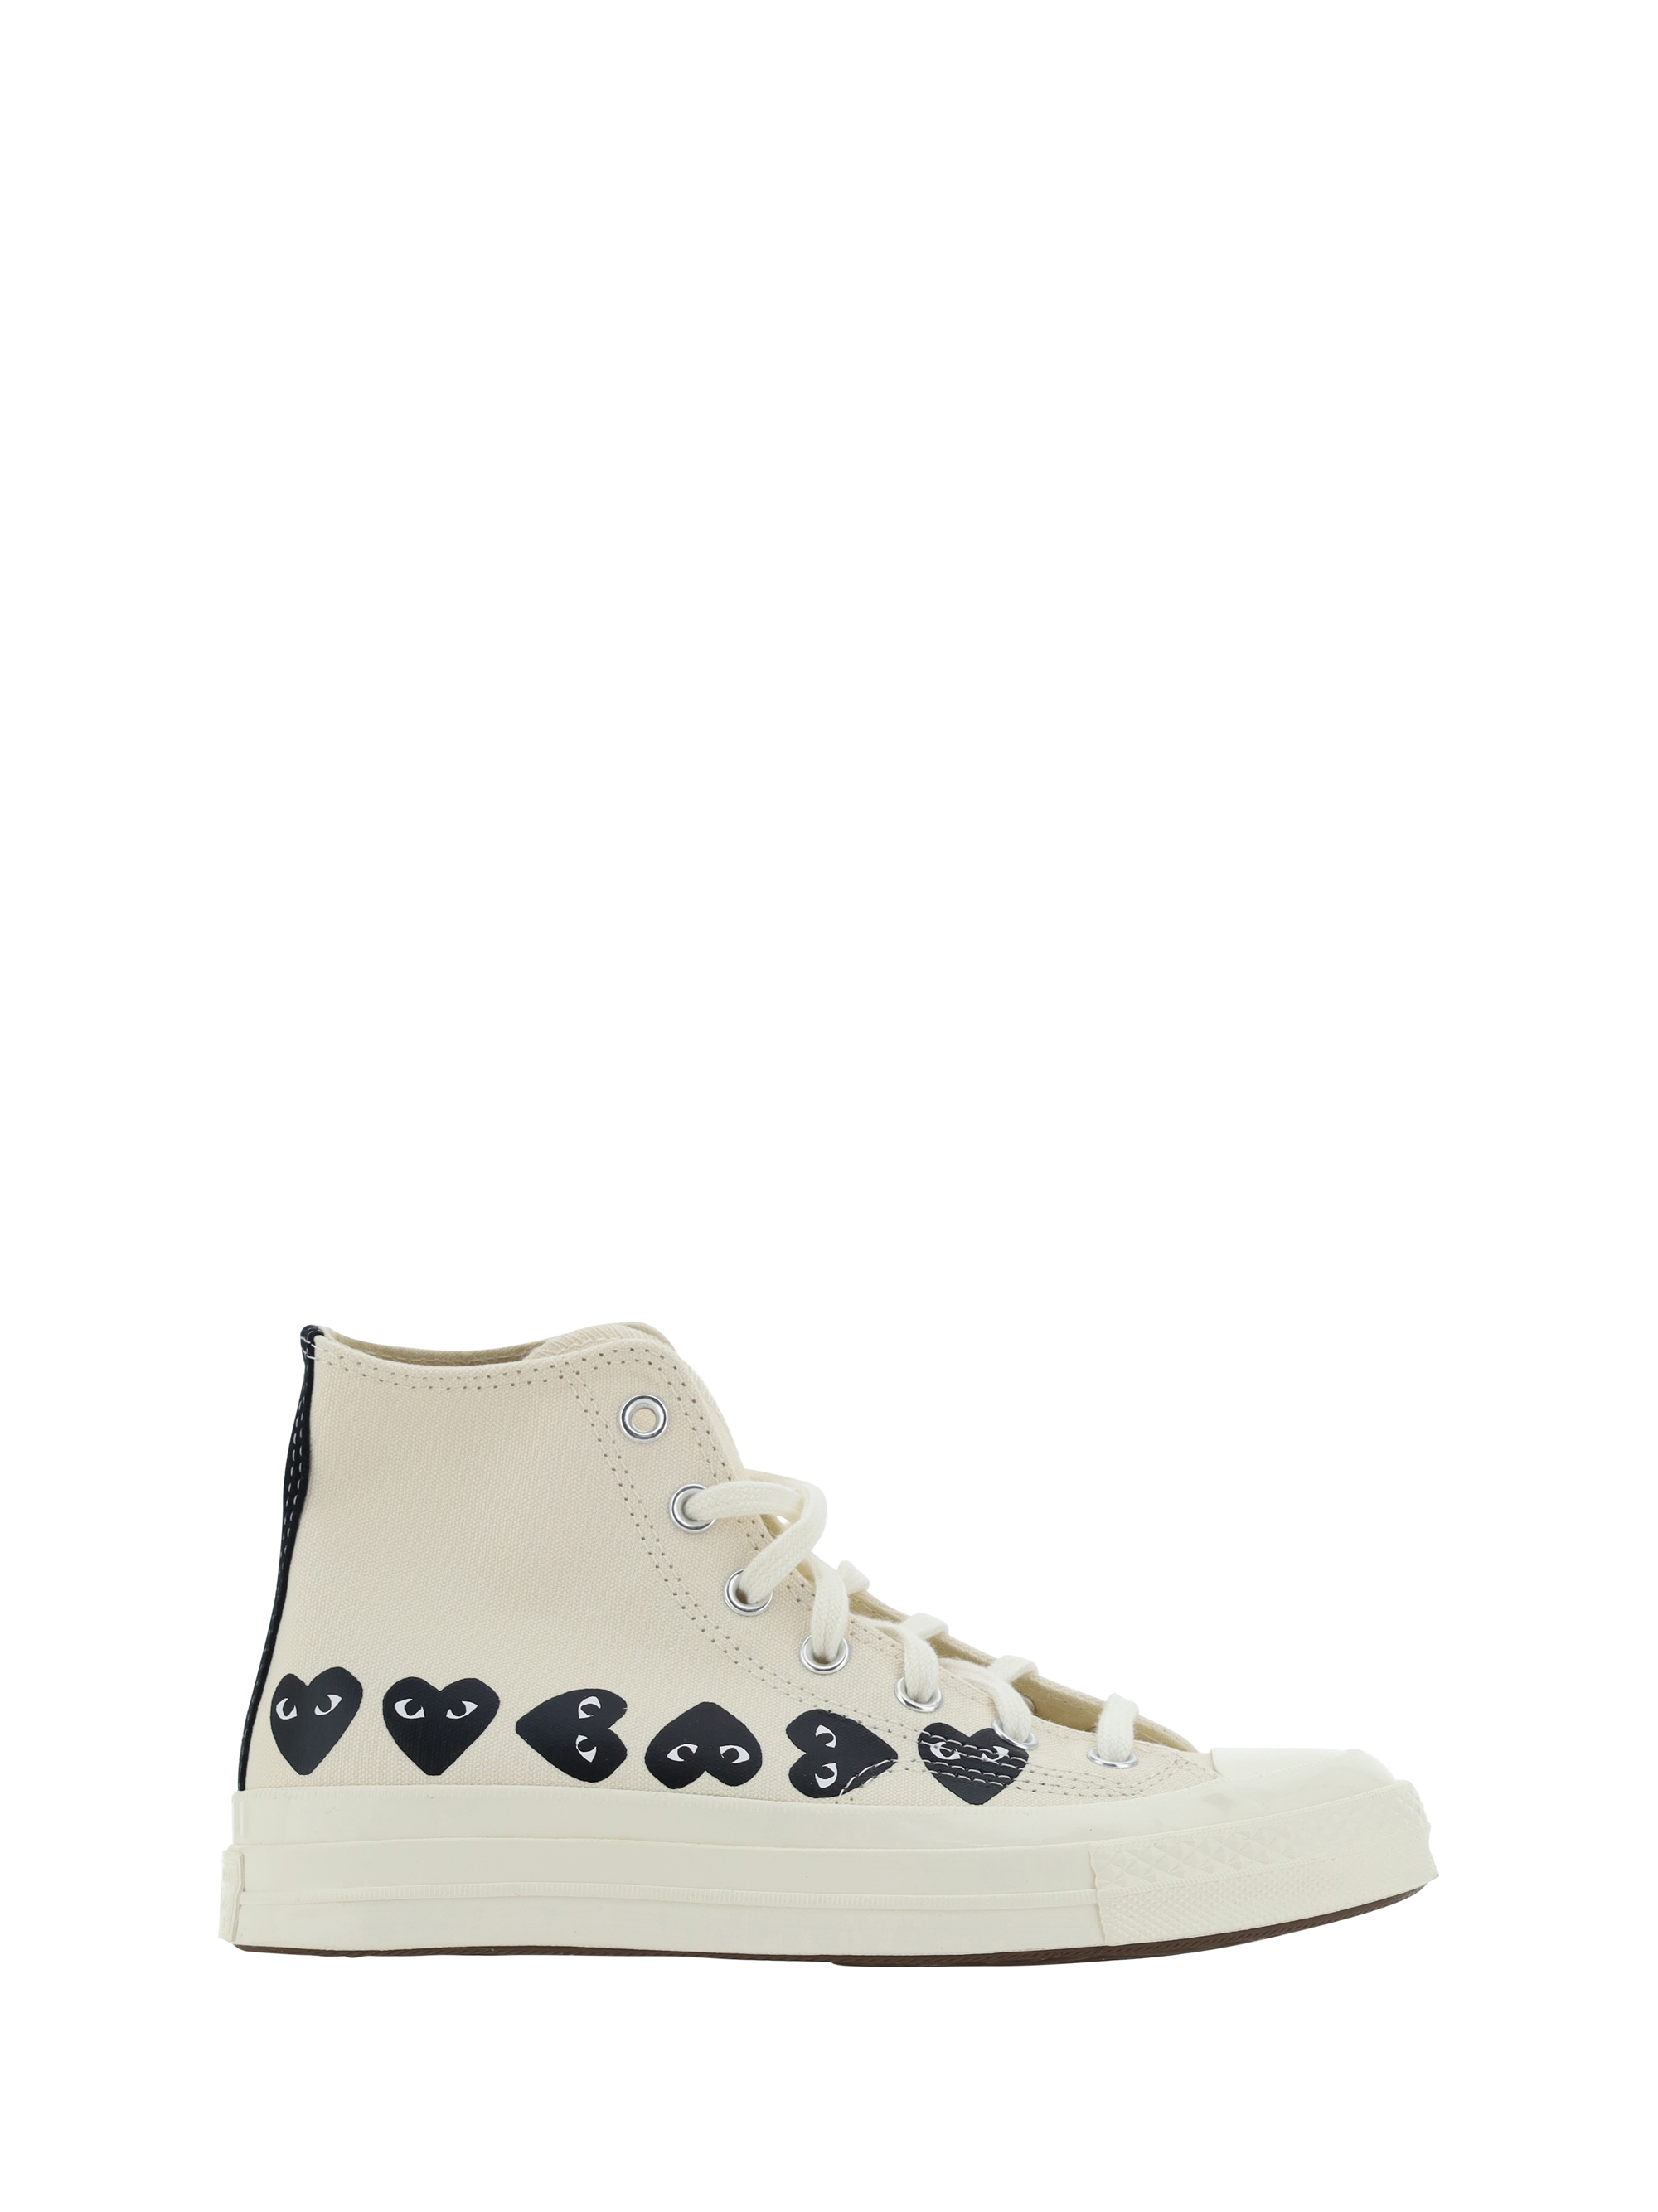 Comme Des Garçons Play X Converse Multi Heart High Sneakers In White